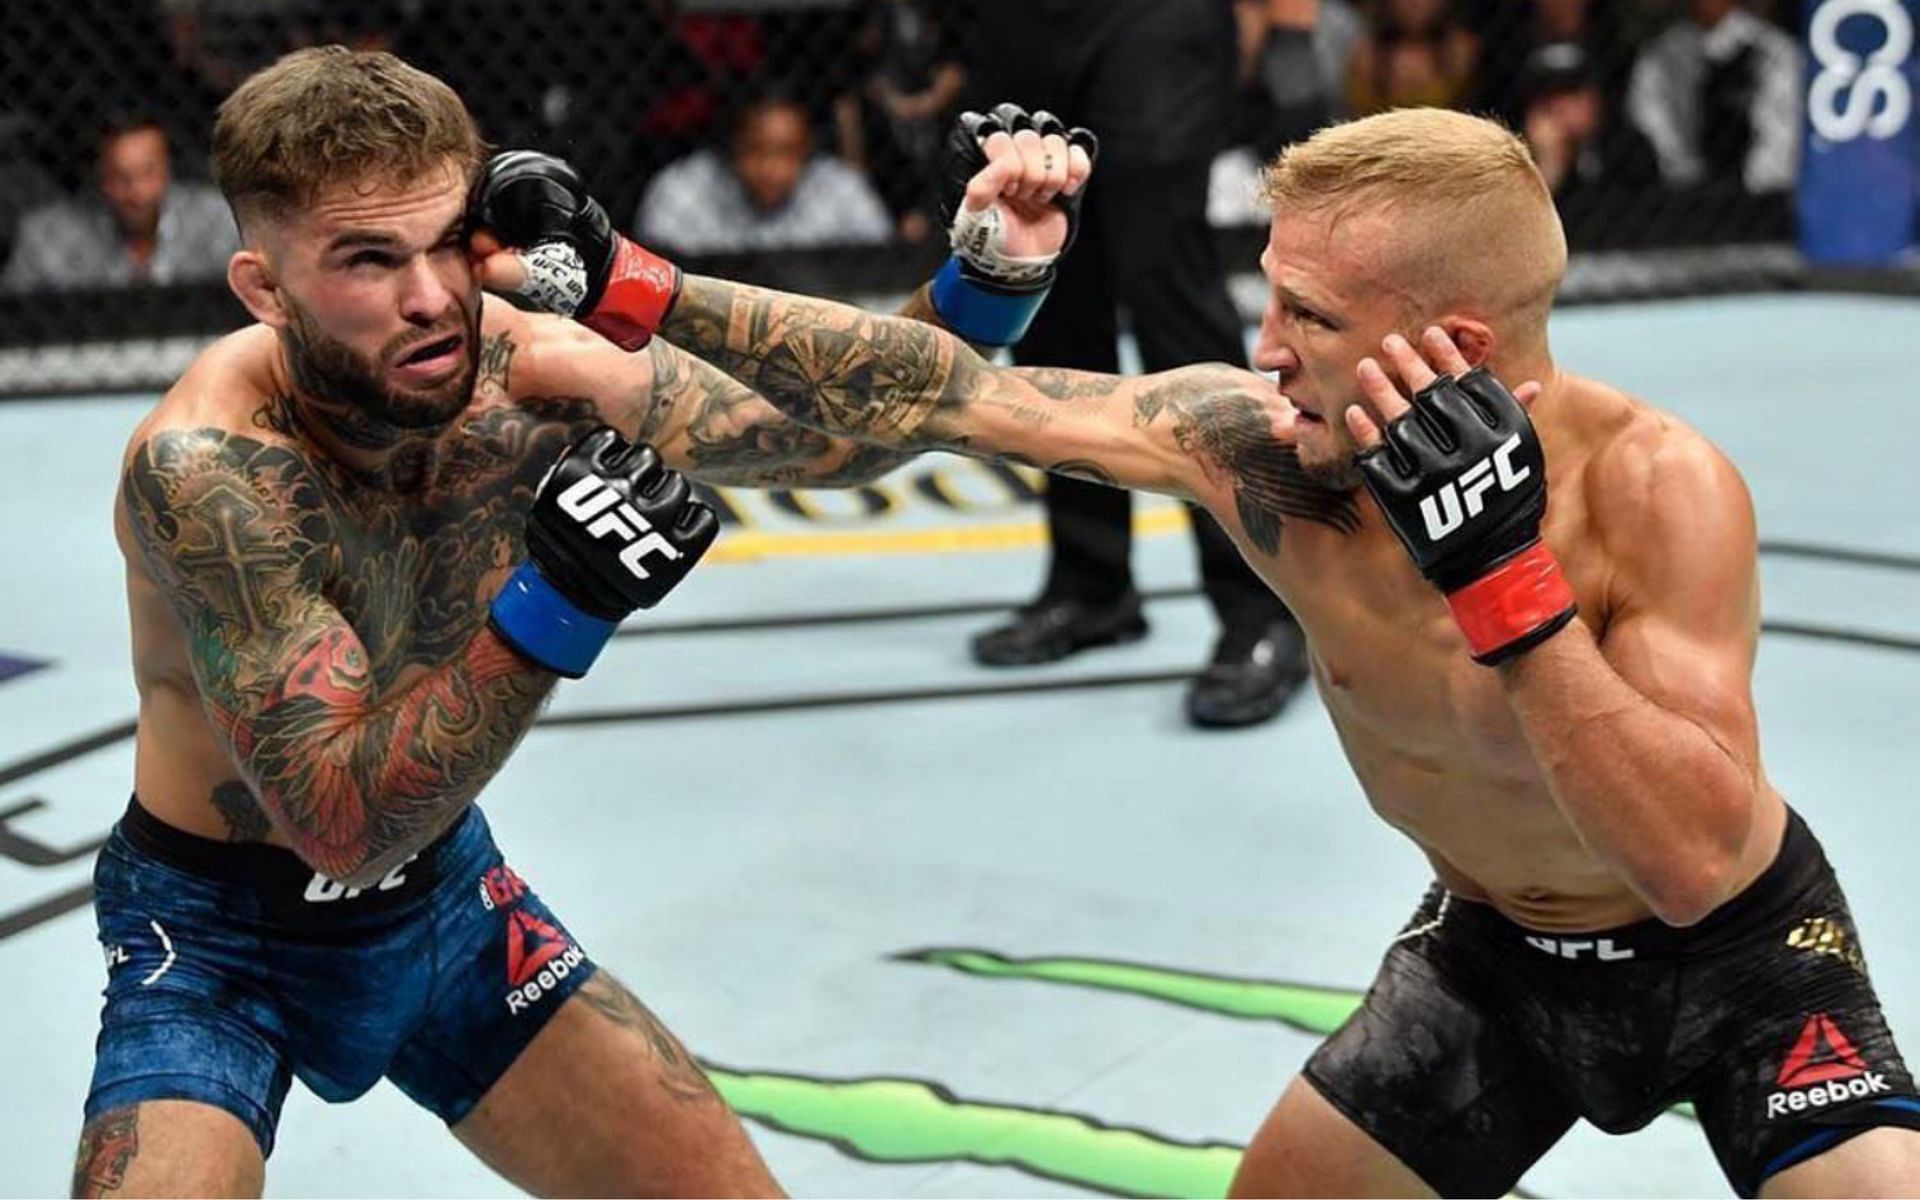 TJ Dillashaw (right) gave his thoughts on Cody Garbrandt